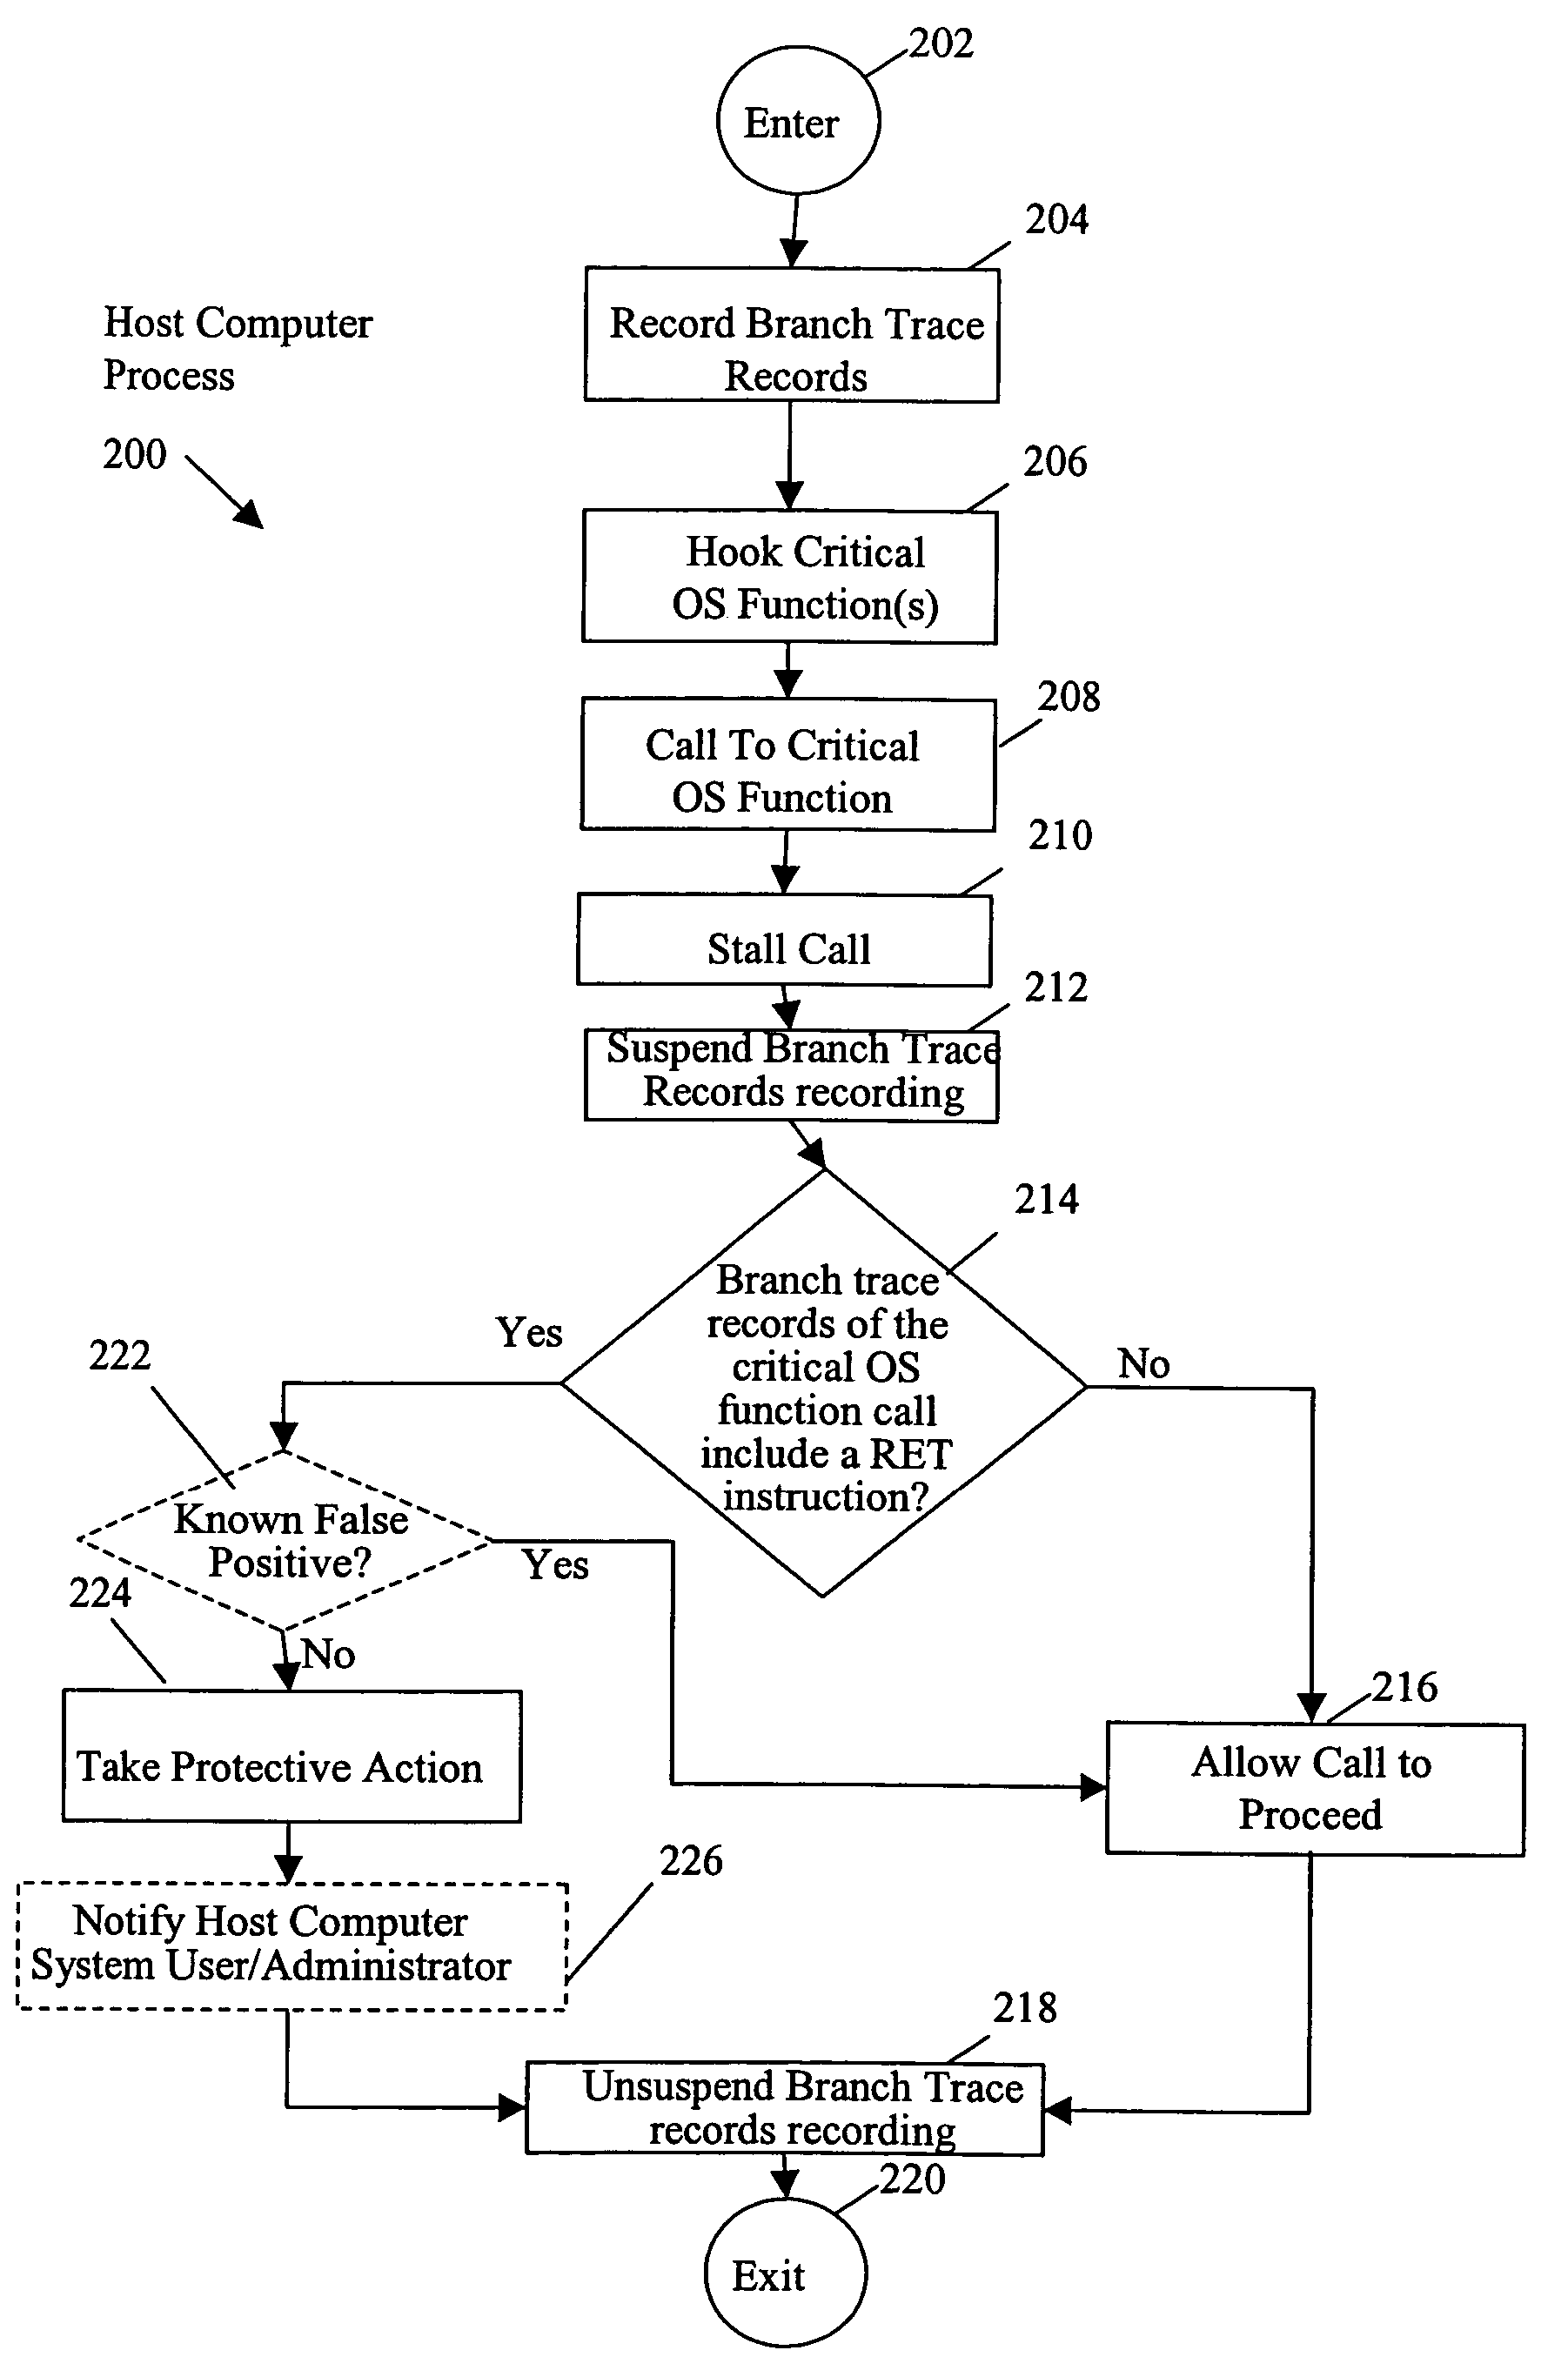 Return-to-LIBC attack detection using branch trace records system and method